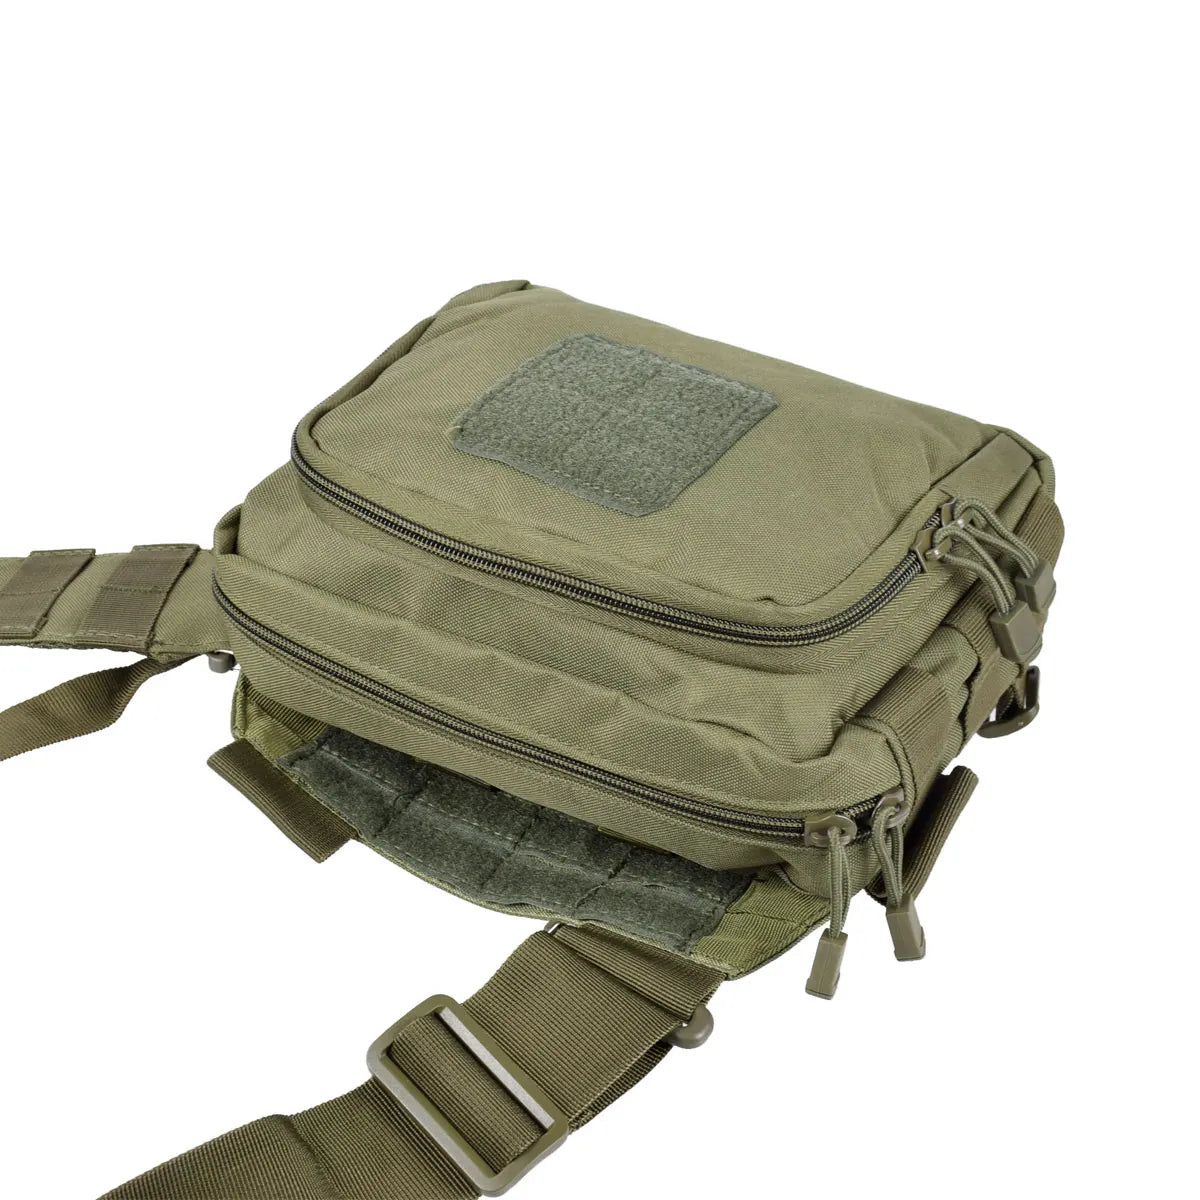 Tactical 2 Banger Bag Messenger Range Bags Quick Release Carryall AR15 M4 Magazine Pouch Crossbody Shooting Hunting Gear